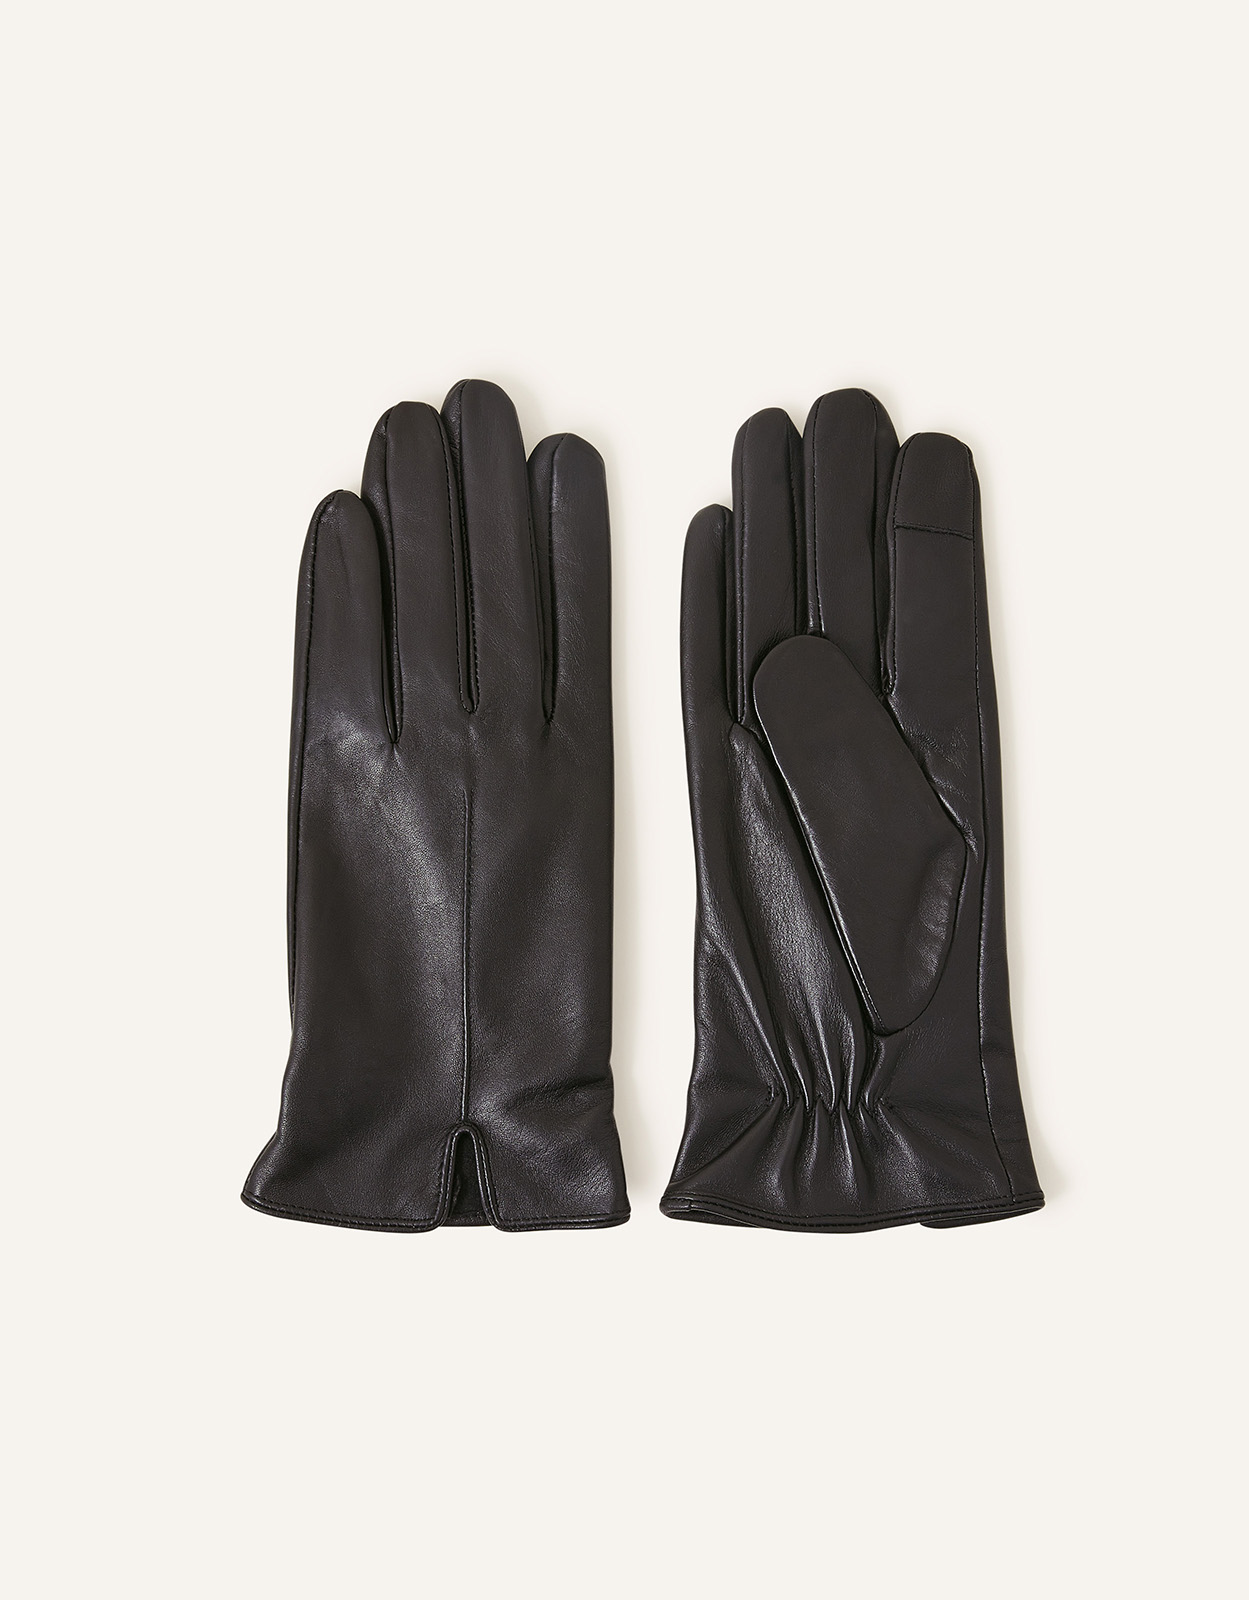 Accessorize Touchscreen Leather Gloves Black